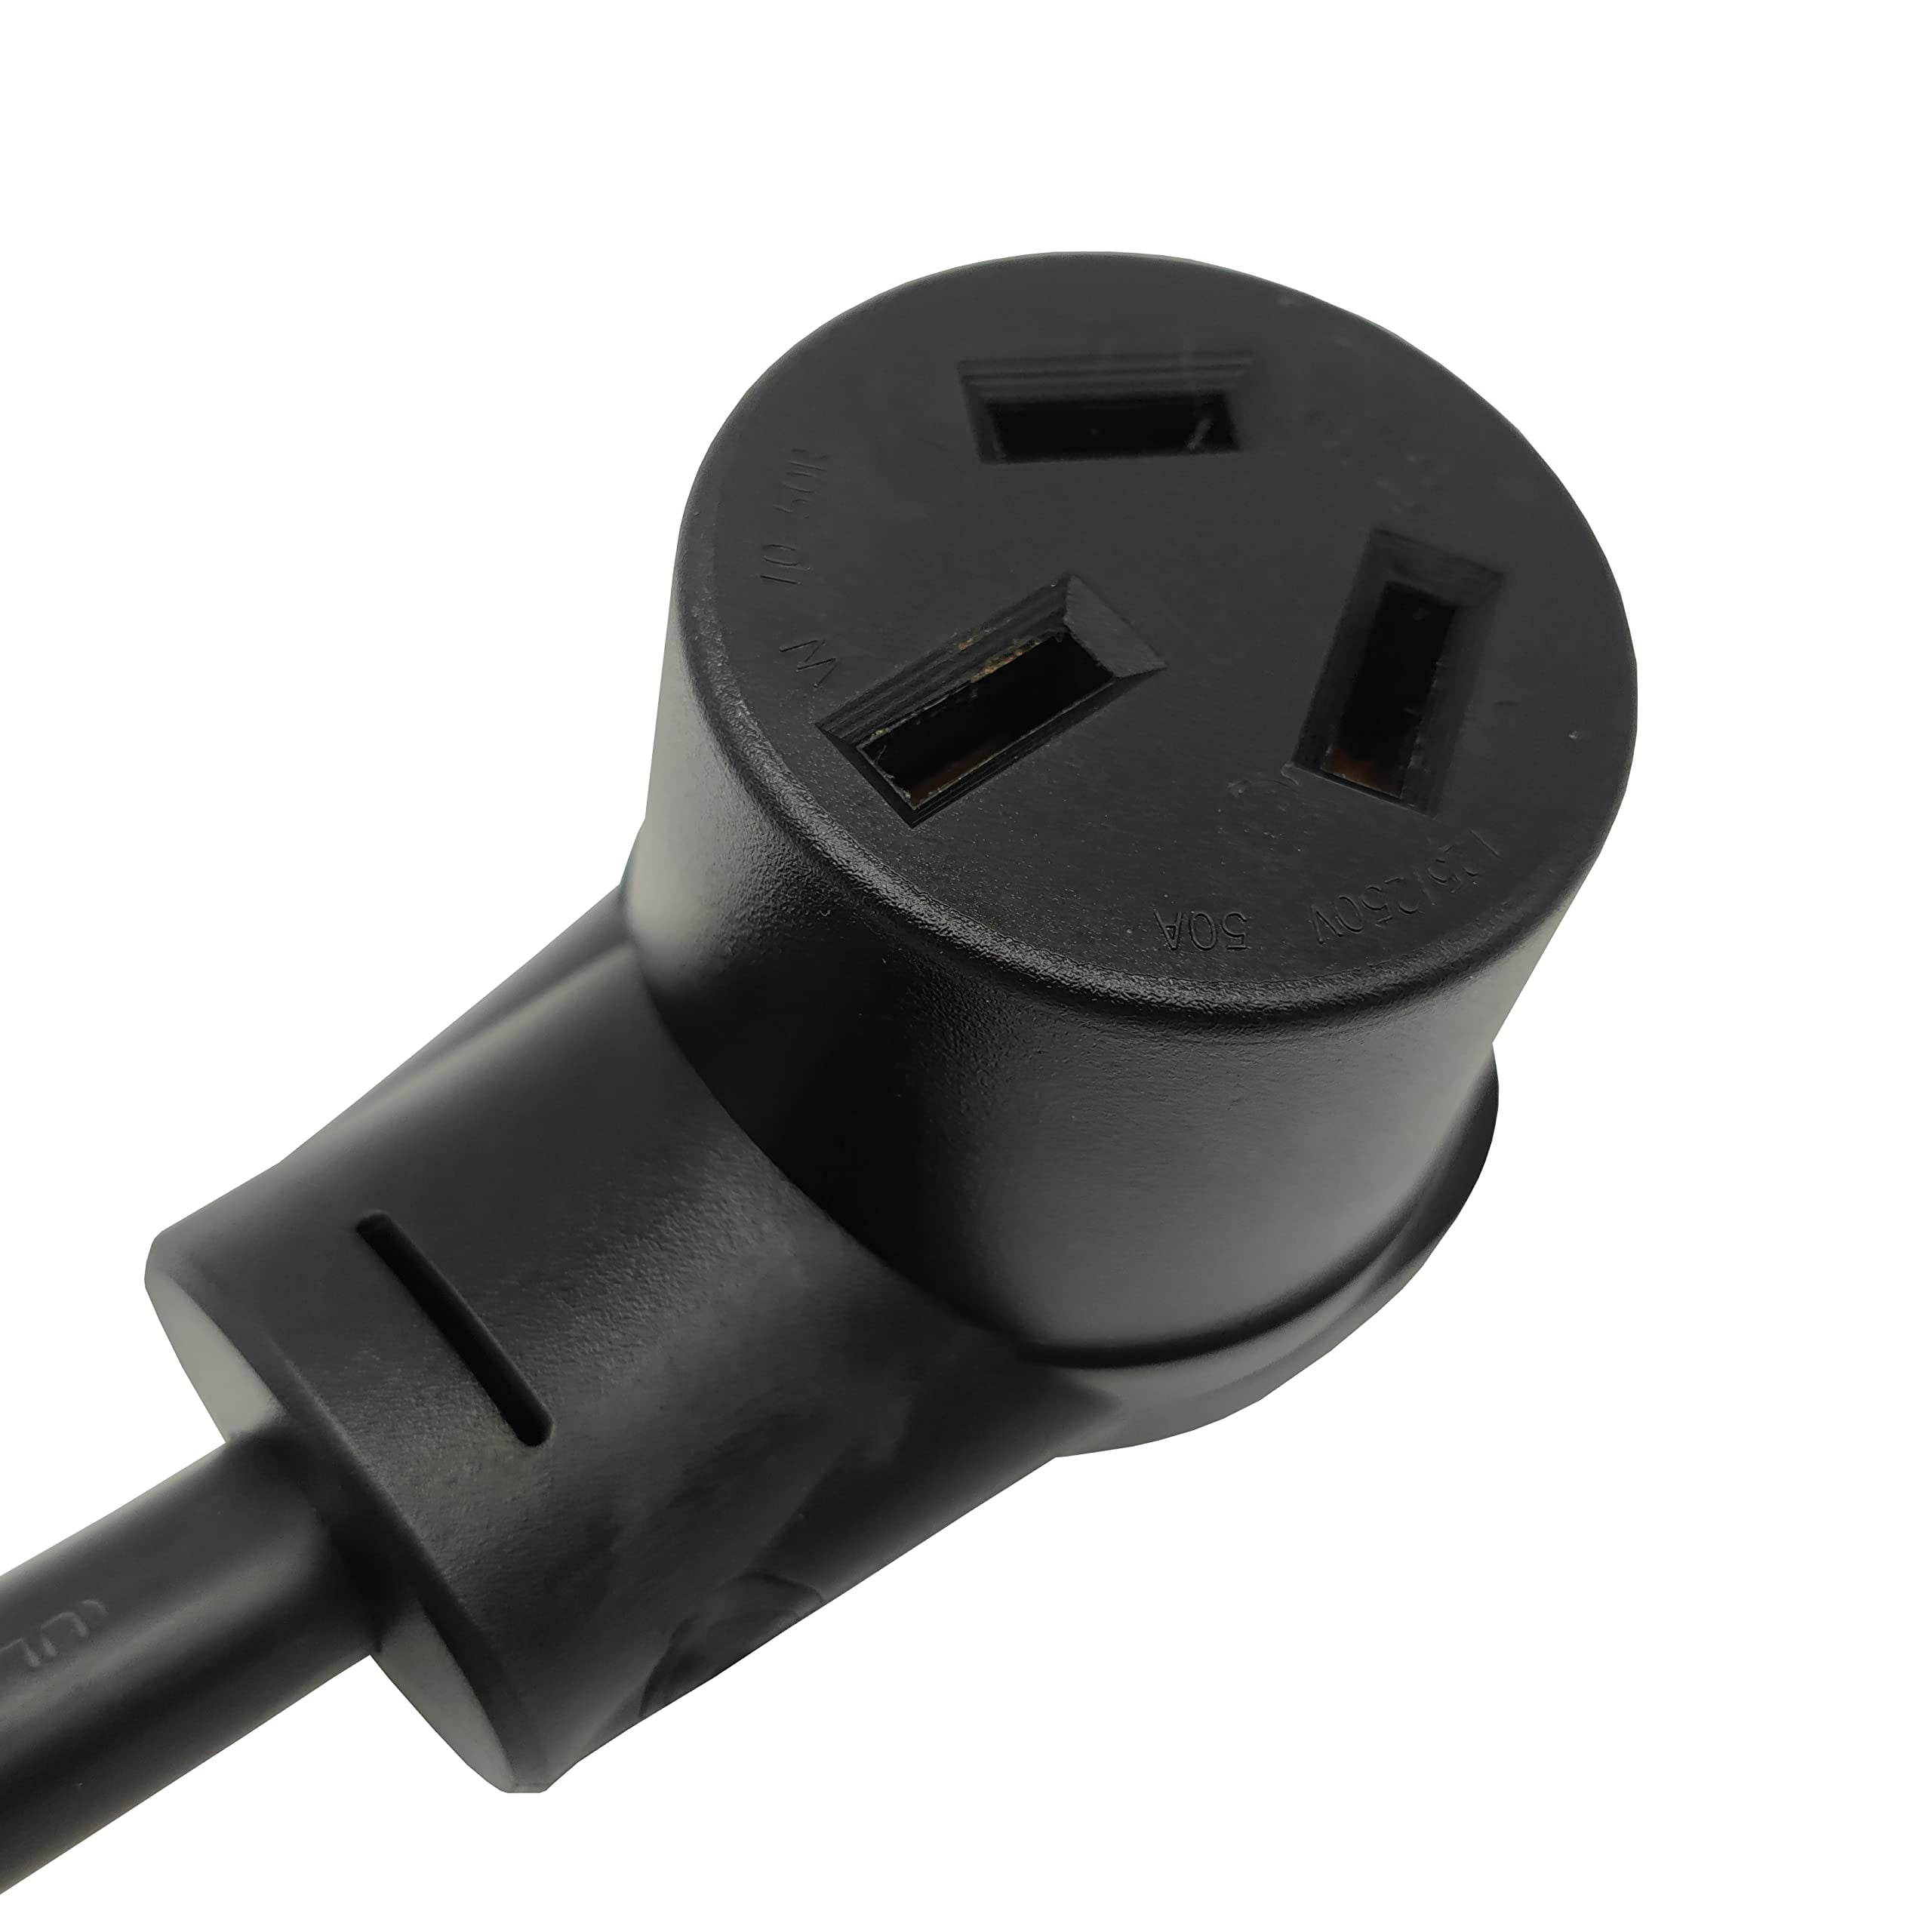 Receptacle, Stove Male 6-15P Electrical Electric 2FT 15A, NEMA 3 Female, Parkworld Output Cord Plug NEMA ONLY 10-50R 6-15 Dryer Prong 61643A A/C to Adapter to 250V Stove 10-50R